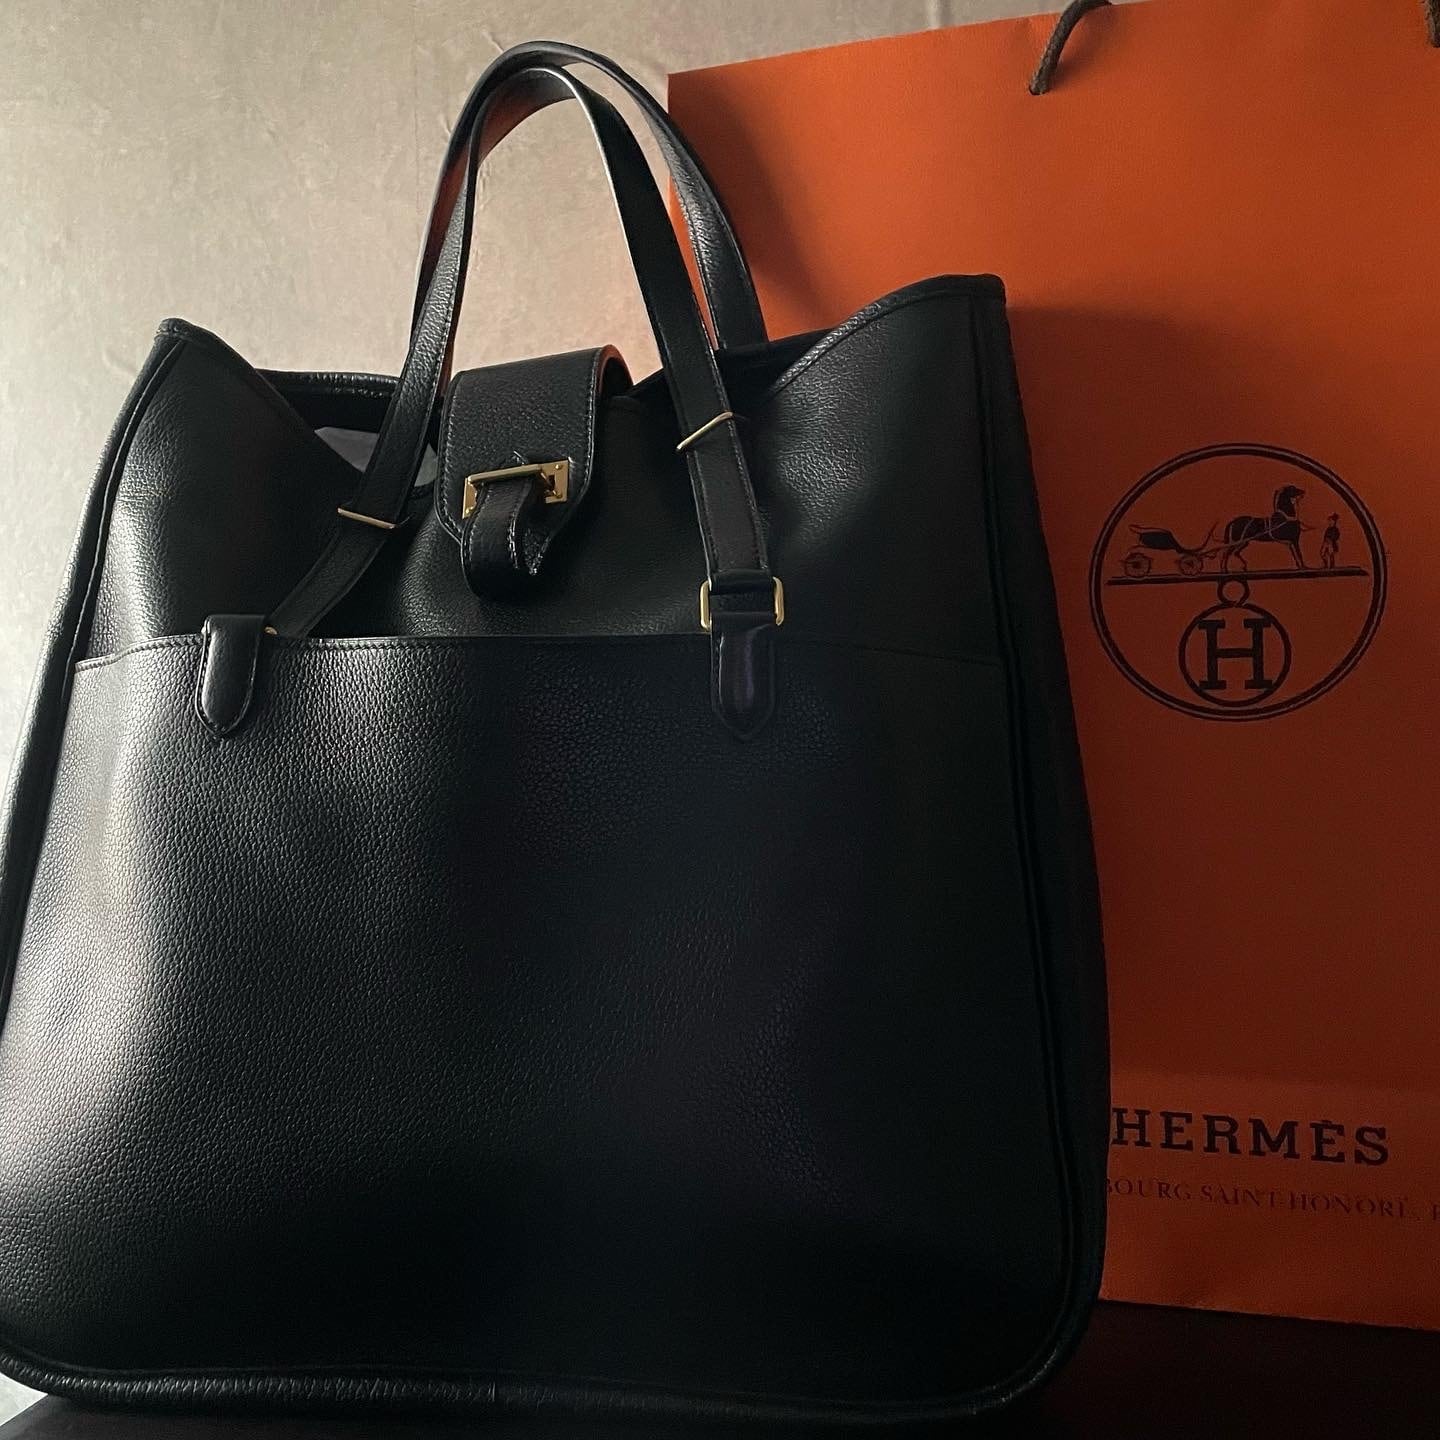 Vintage Hermès Leather Toto Bag 【正規品】エルメス トートバッグ フランス製